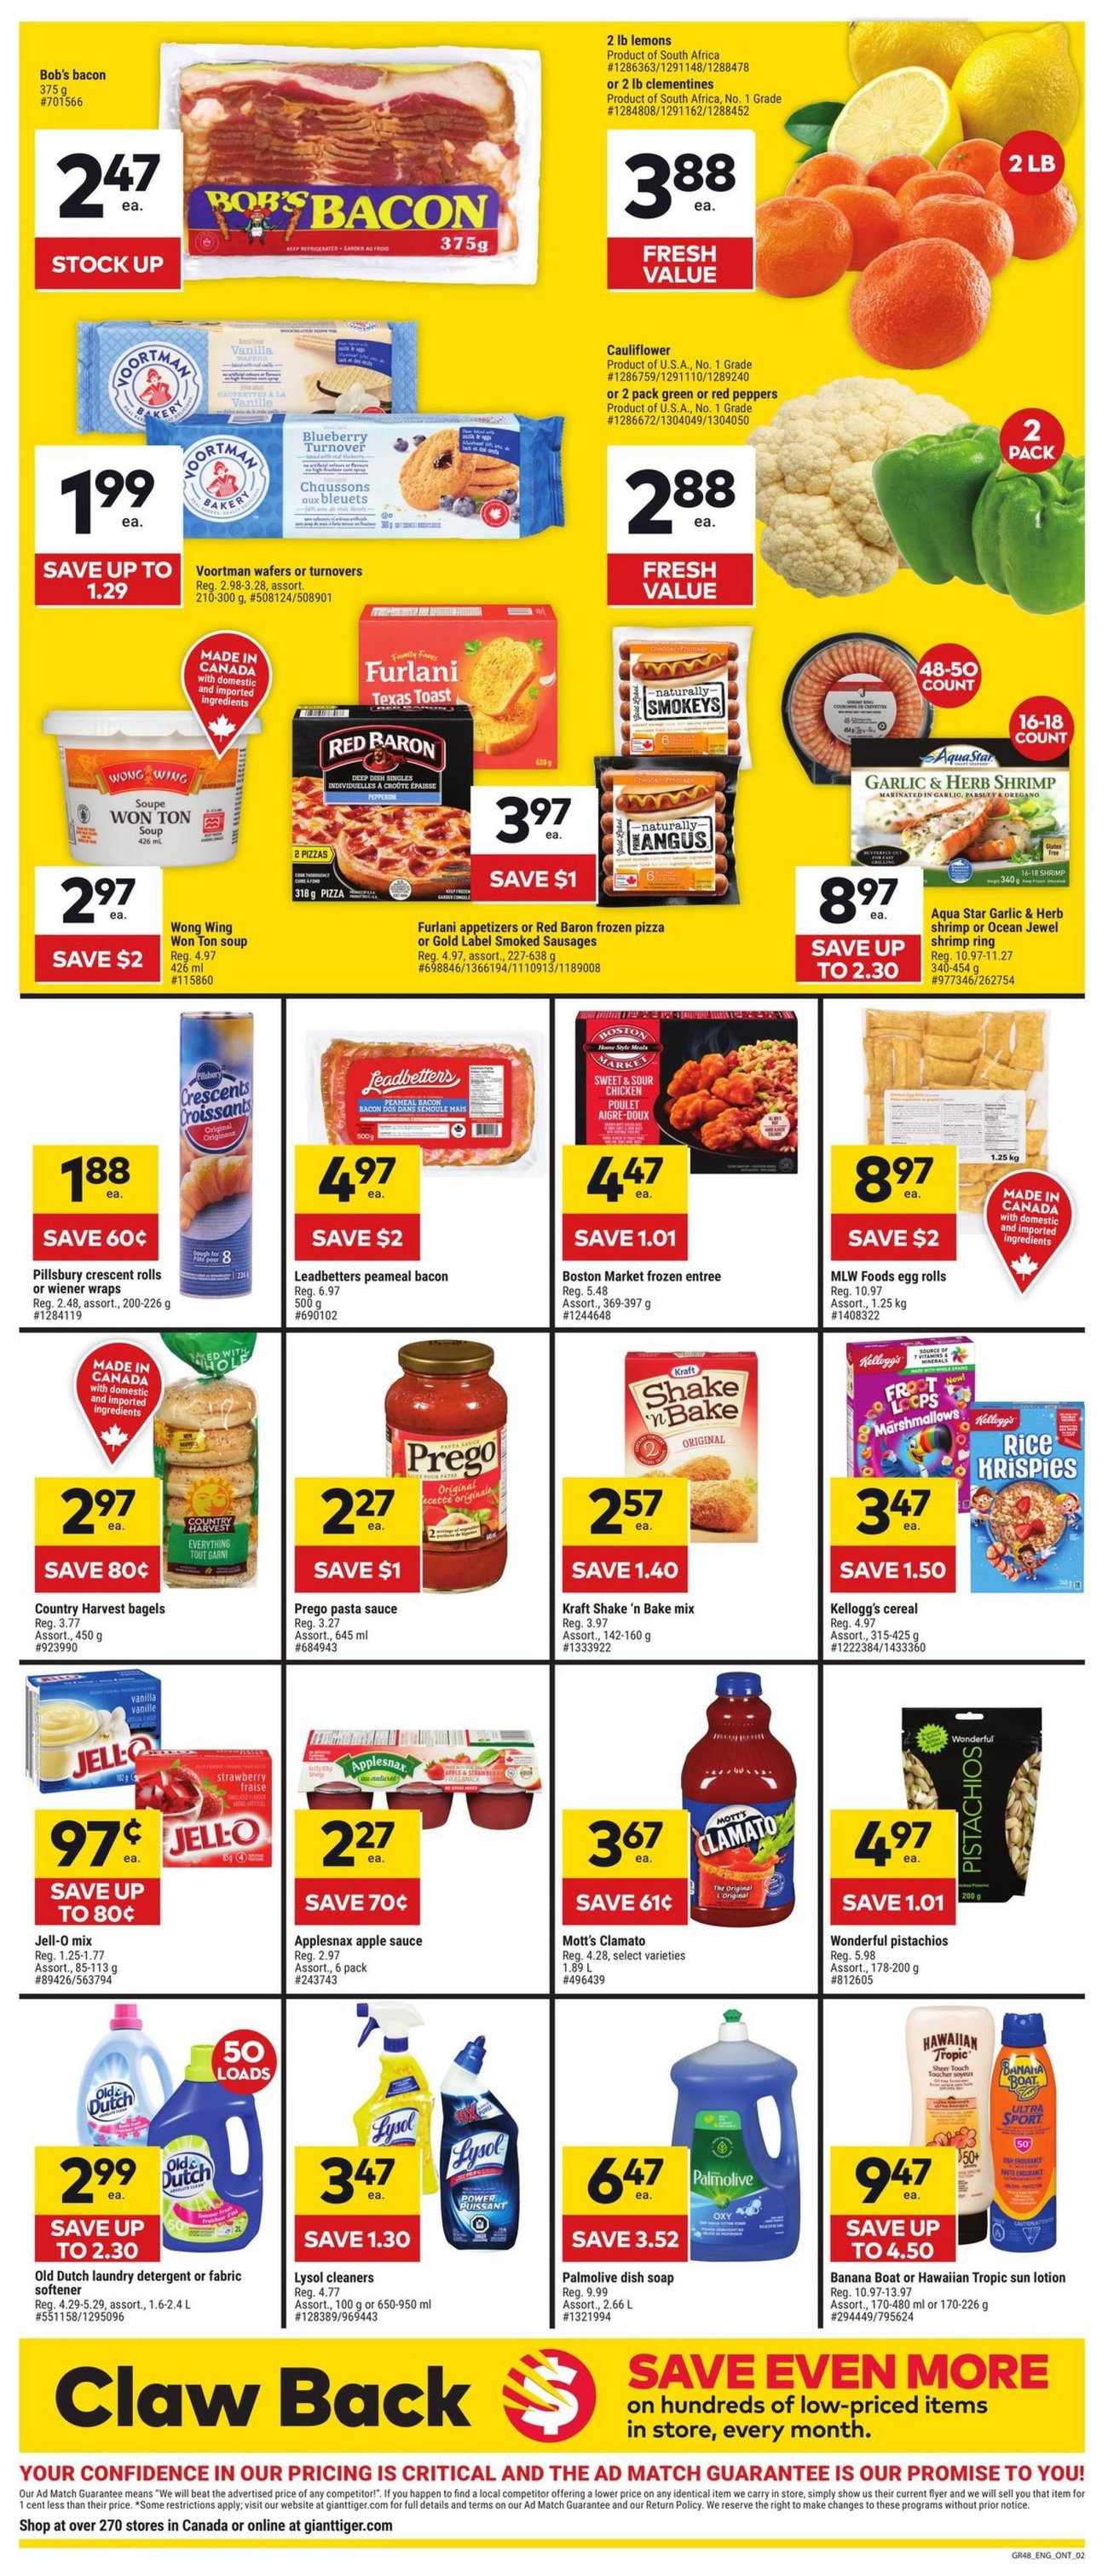 Giant Tiger - Ontario - Weekly Flyer Specials - Page 2